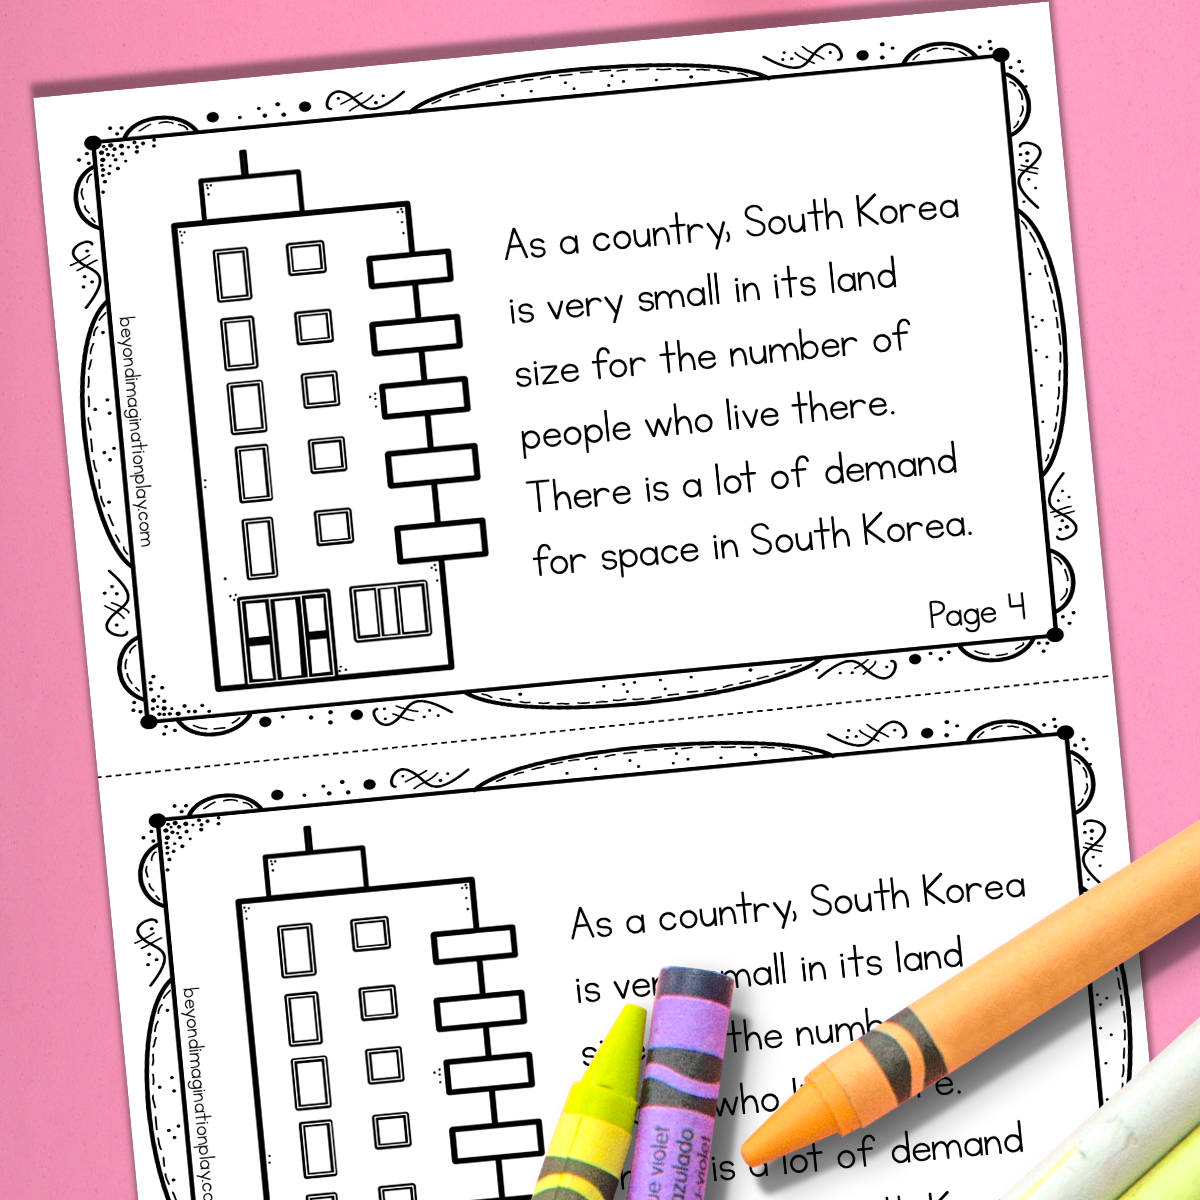 South Korea Country Study (Deluxe Edition)